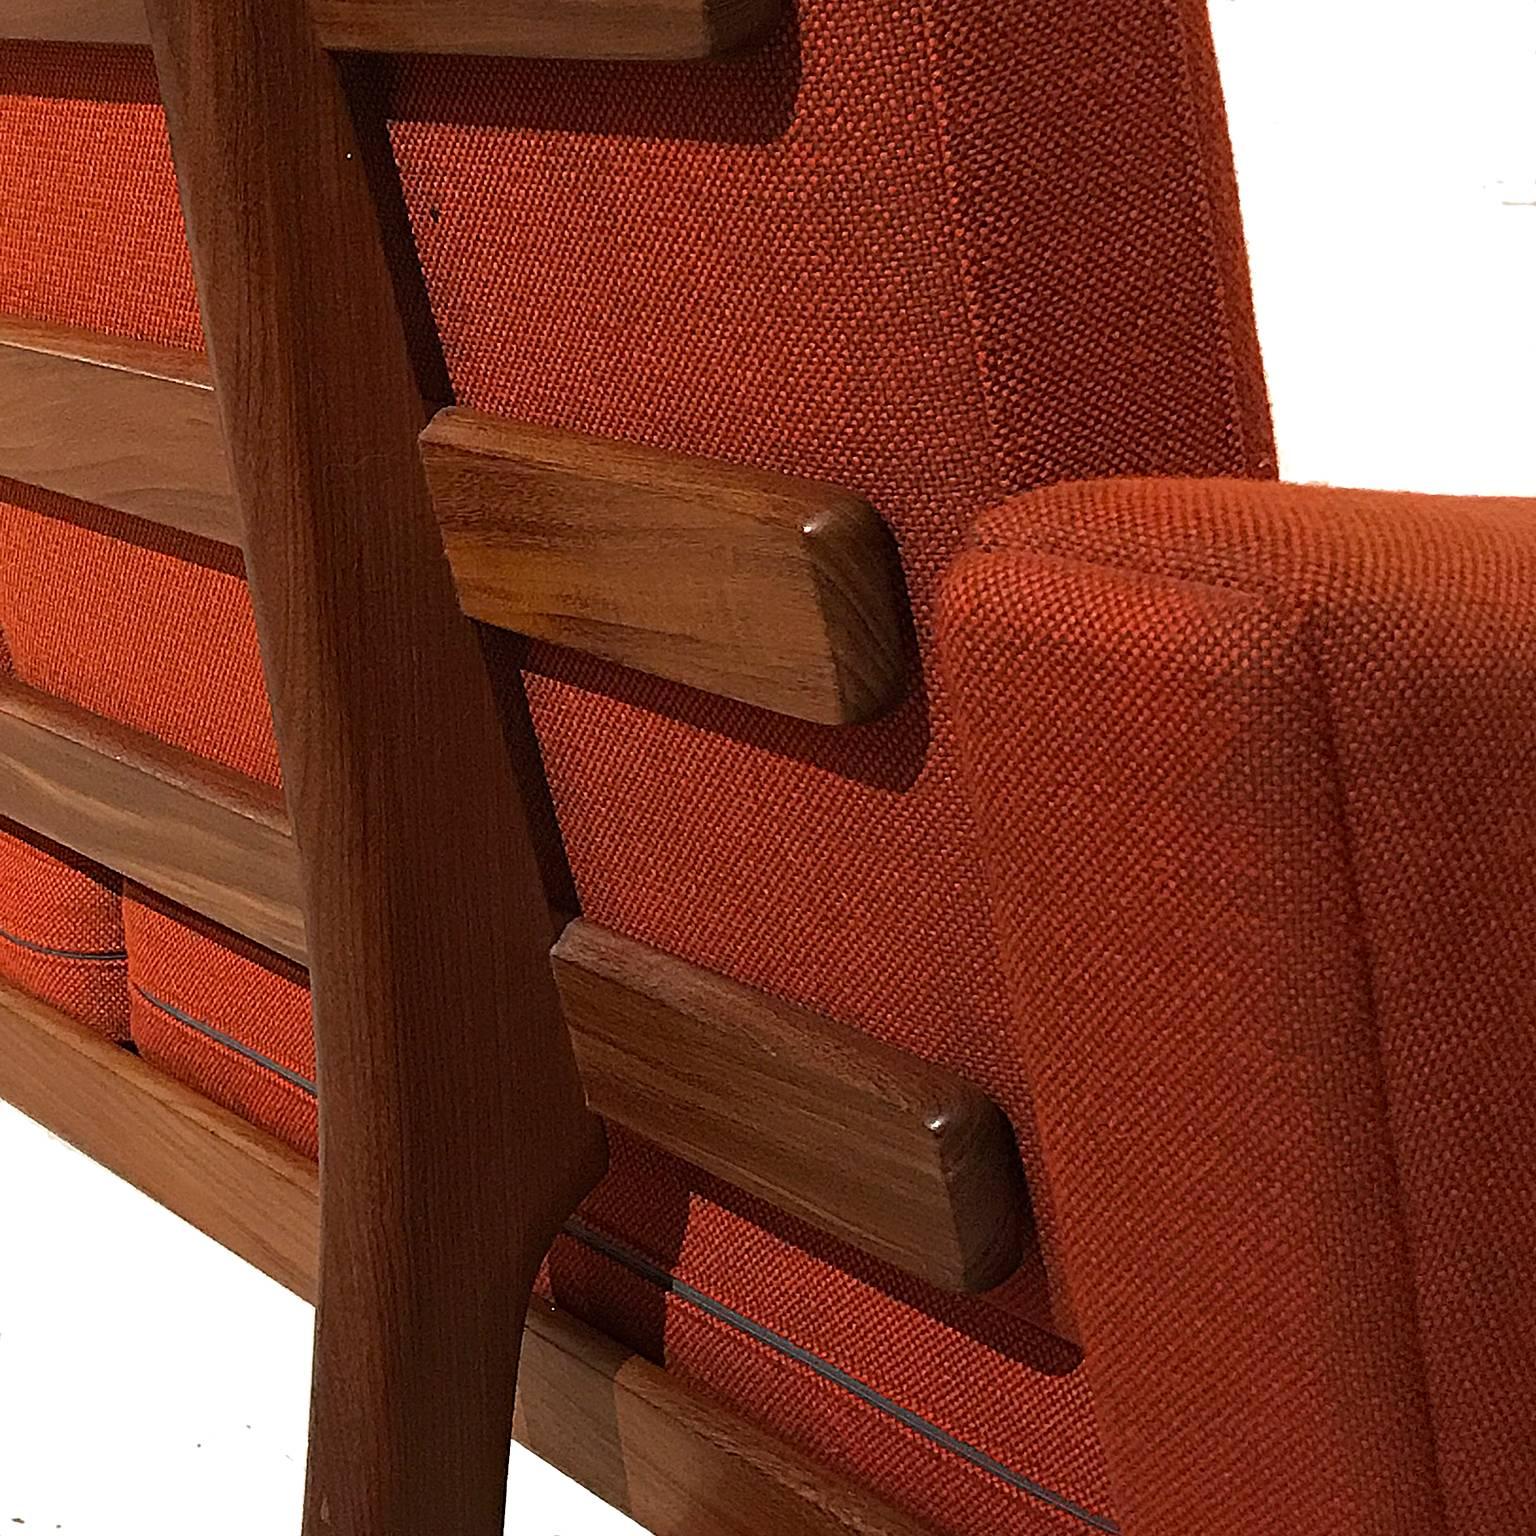 Hans Wegner teak frame sofa by GETAMA with original fabric and spring cushions. Very minor marks on feet otherwise near excellent condition.